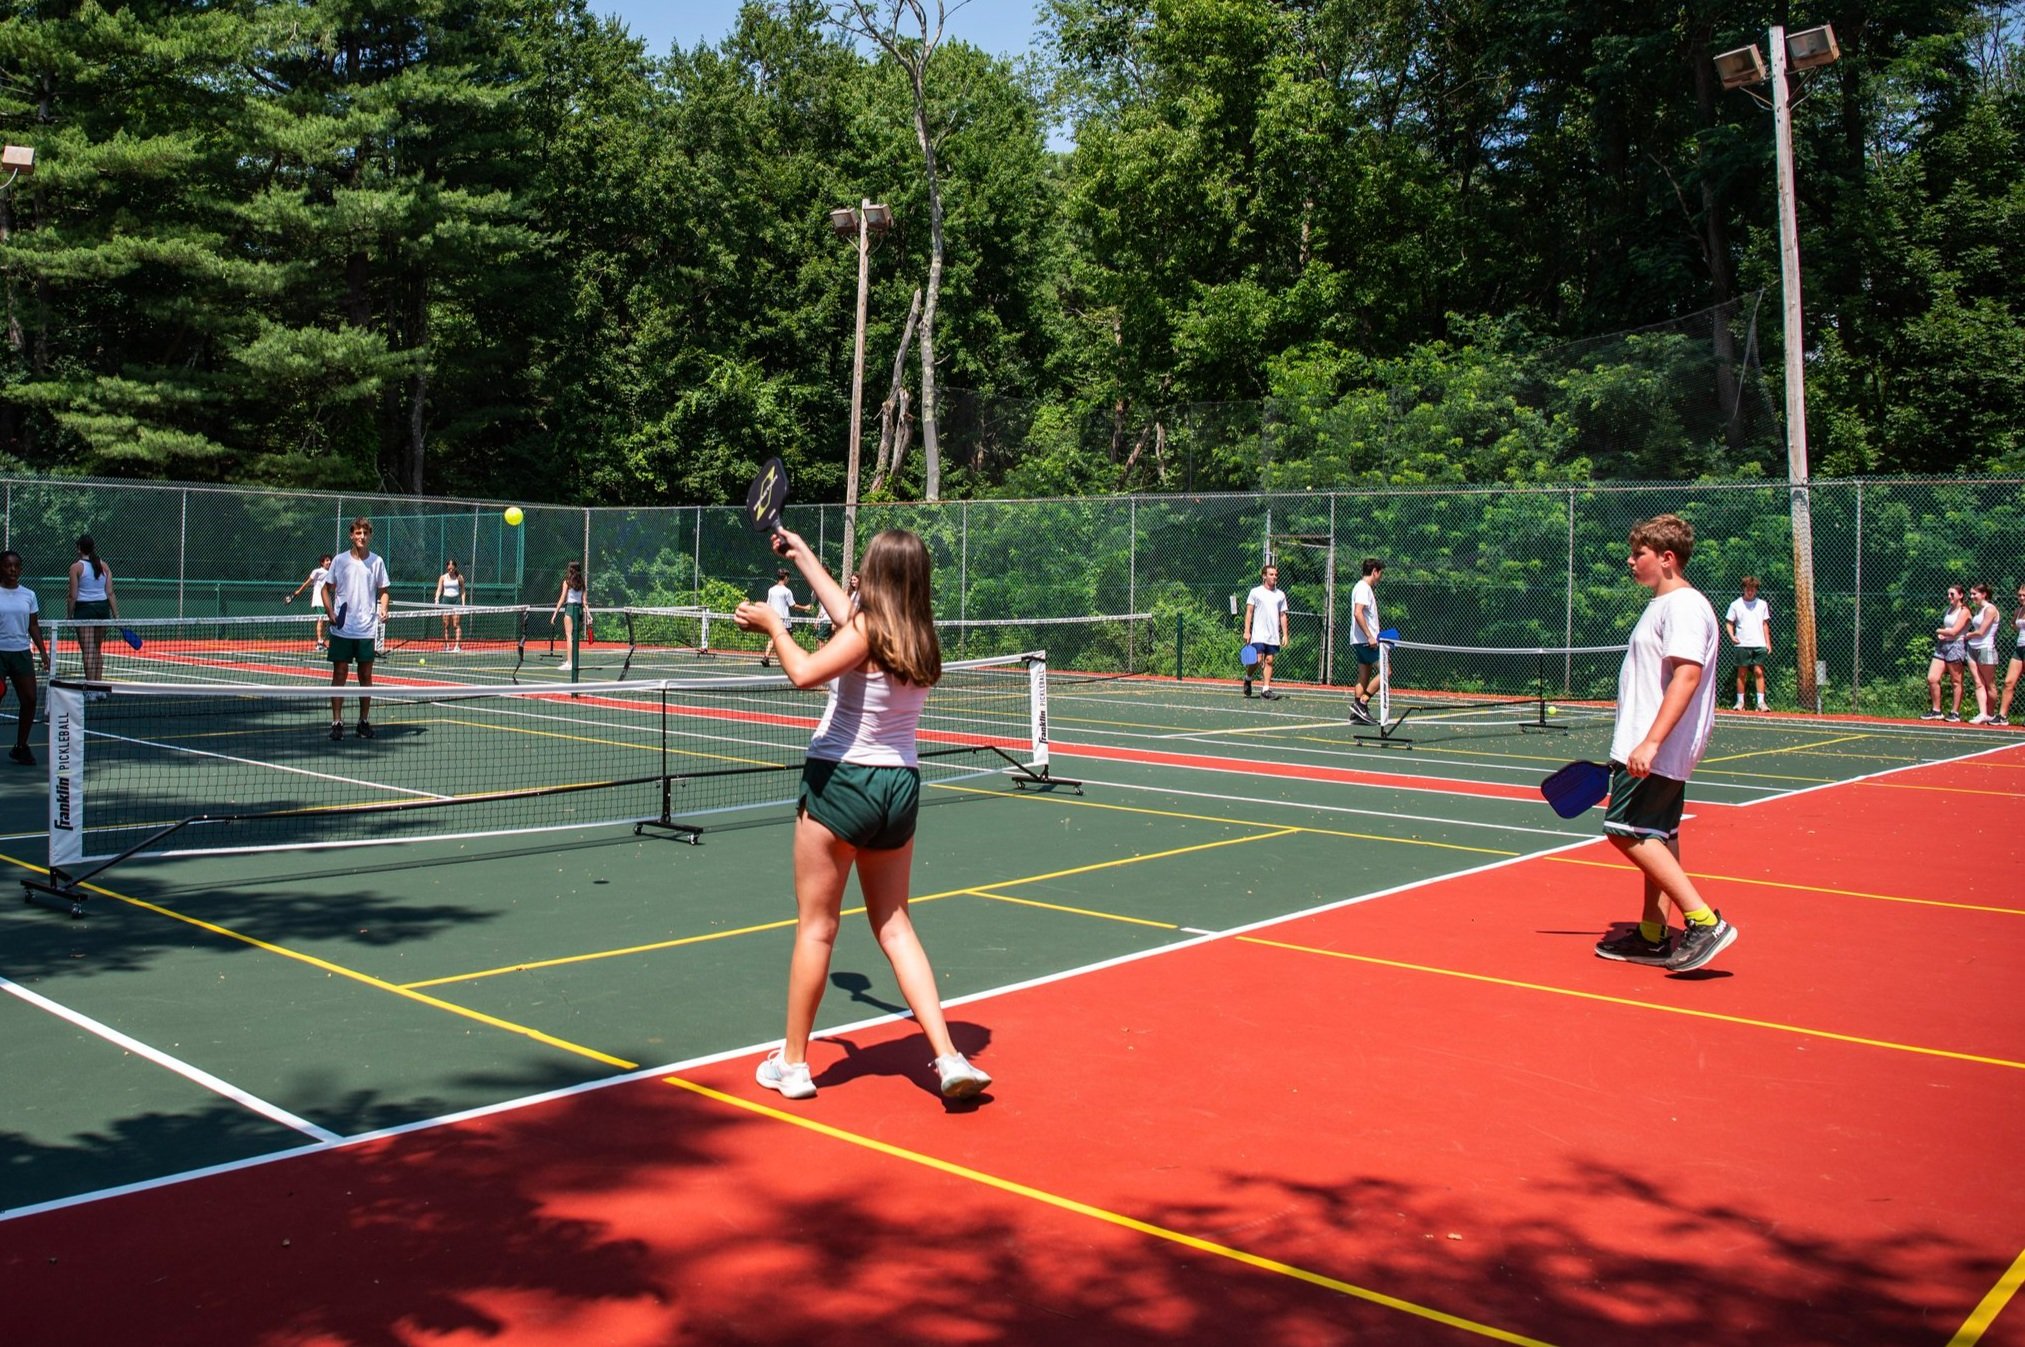  Now—All-weather surface, lighting, and a coed Pickleball tournament.  